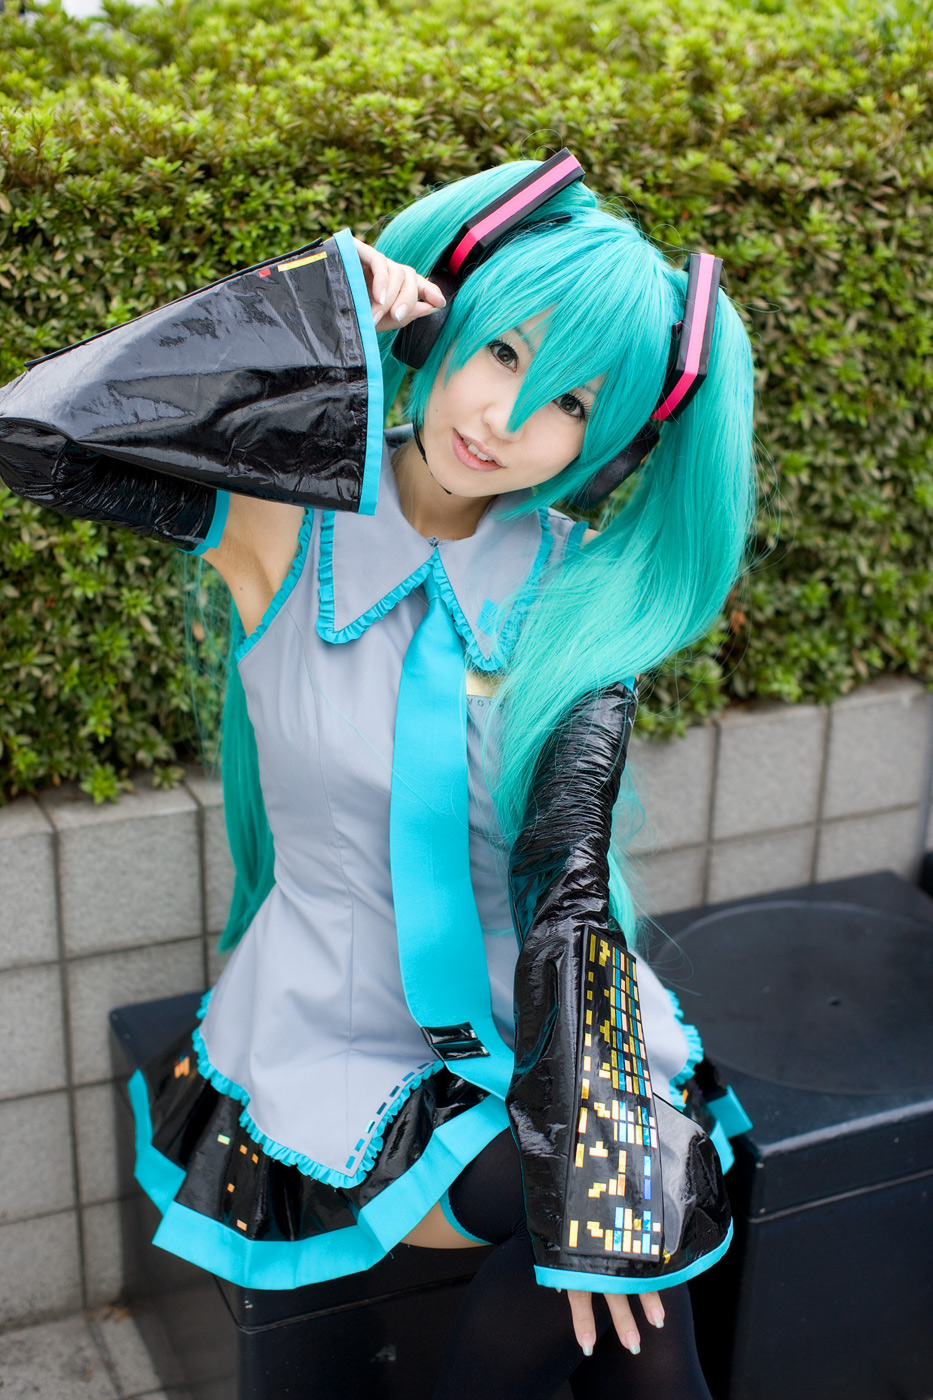 All About Cosplay: Types of Cosplayers